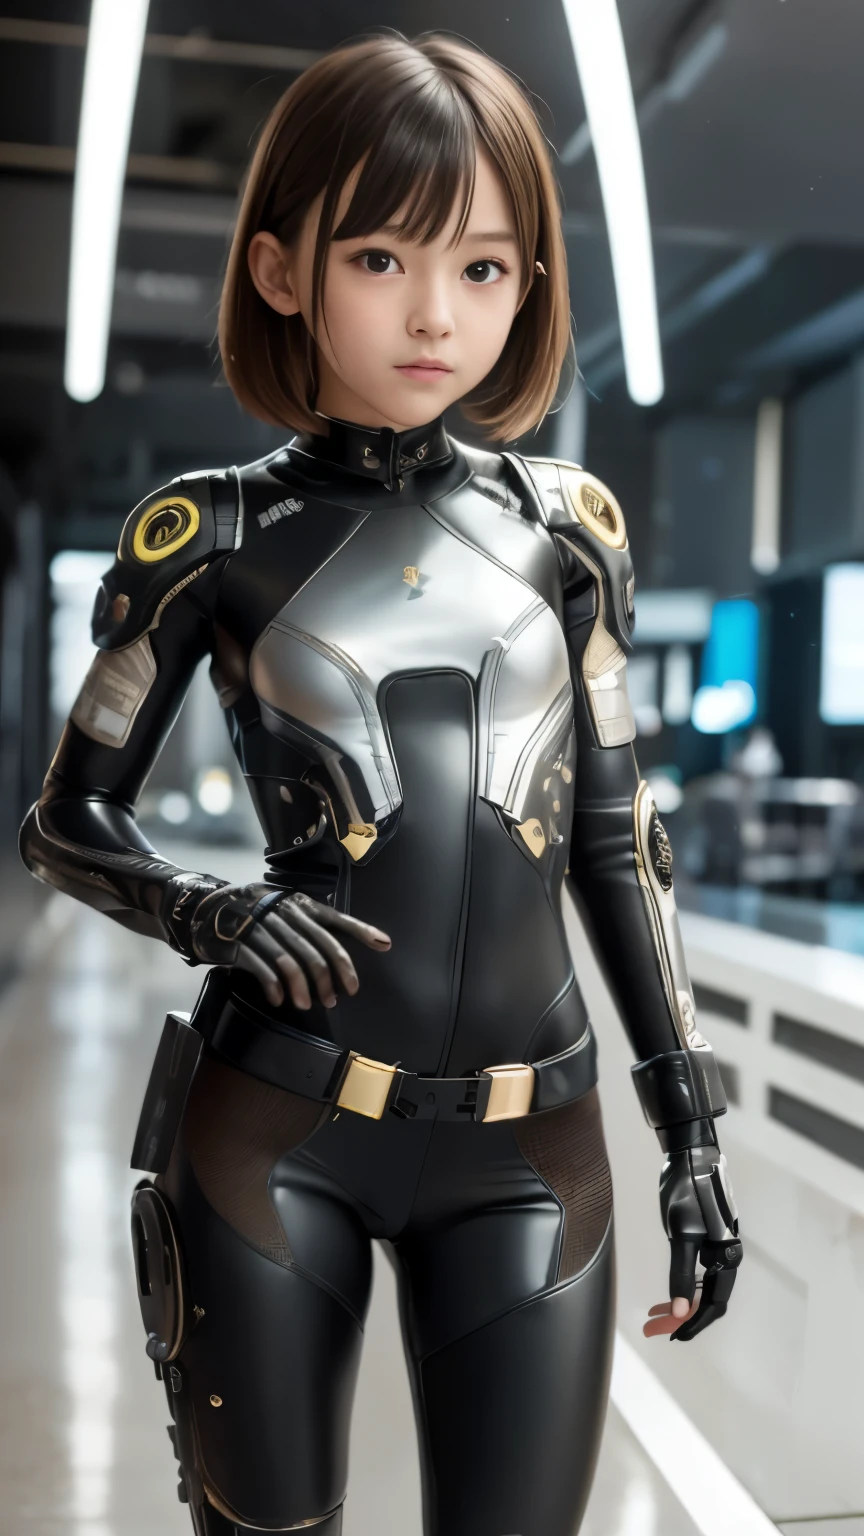 high quality, ​realistic masterpiece, two close friends, Beautiful tween girls, small skinny girls, cute girl face, cyberpunk, Wearing futuristic robotic tactical shear armor cyberpunk suit with cutouts showing torso, skinny athletic body, innocent, playful, Famous actresses of Japan, very beautiful face